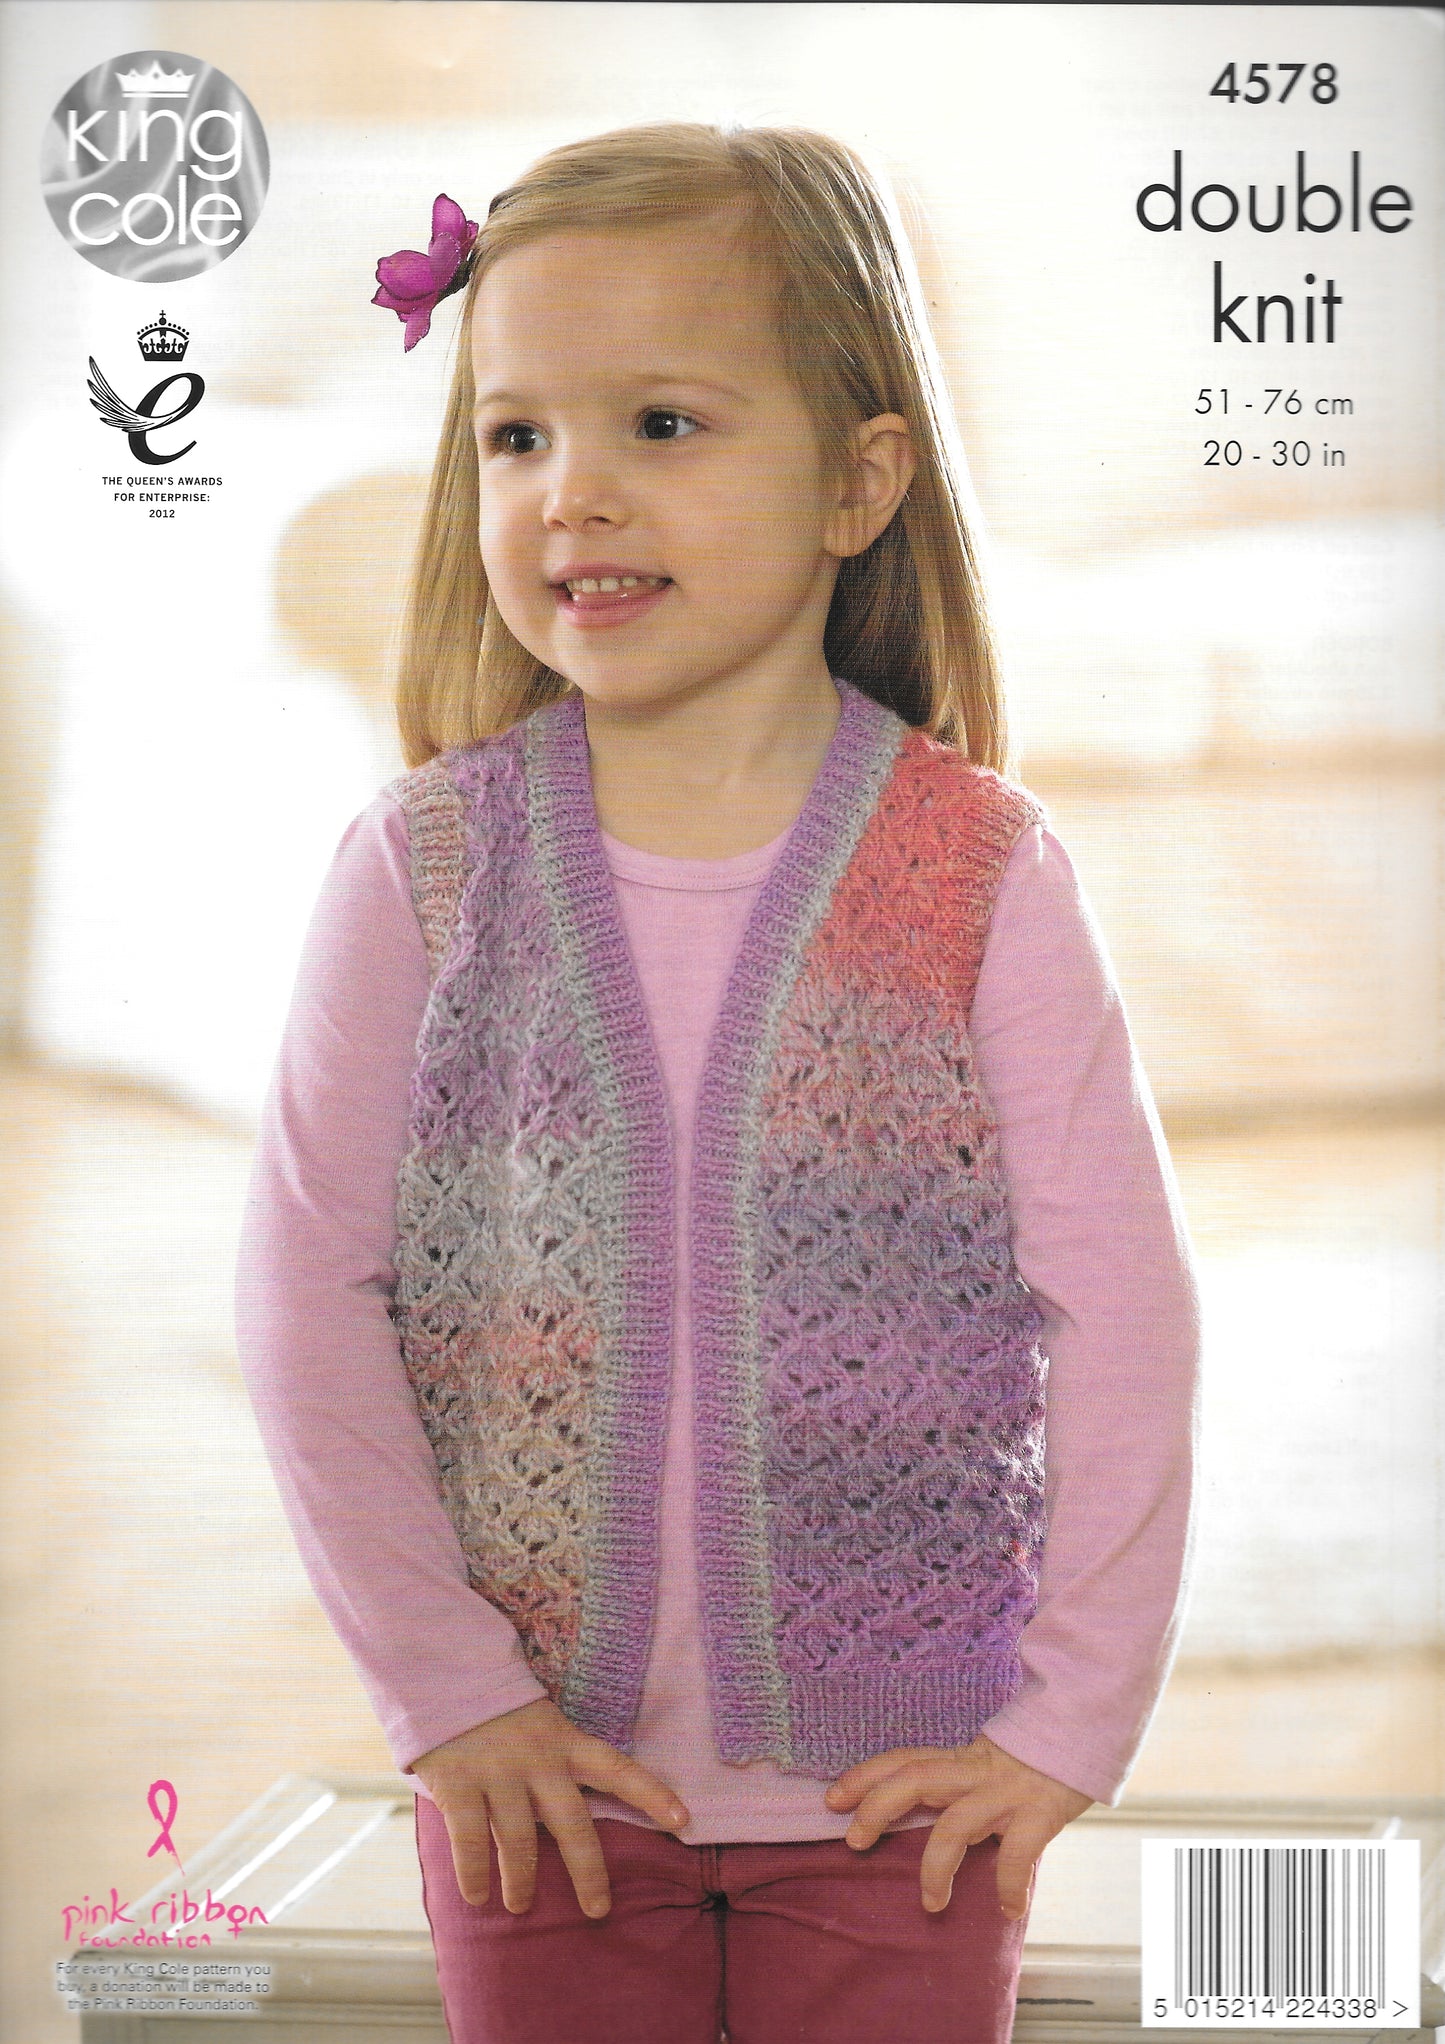 4578 King Cole Double Knit Baby Cardigan and Waistcoat knitting pattern